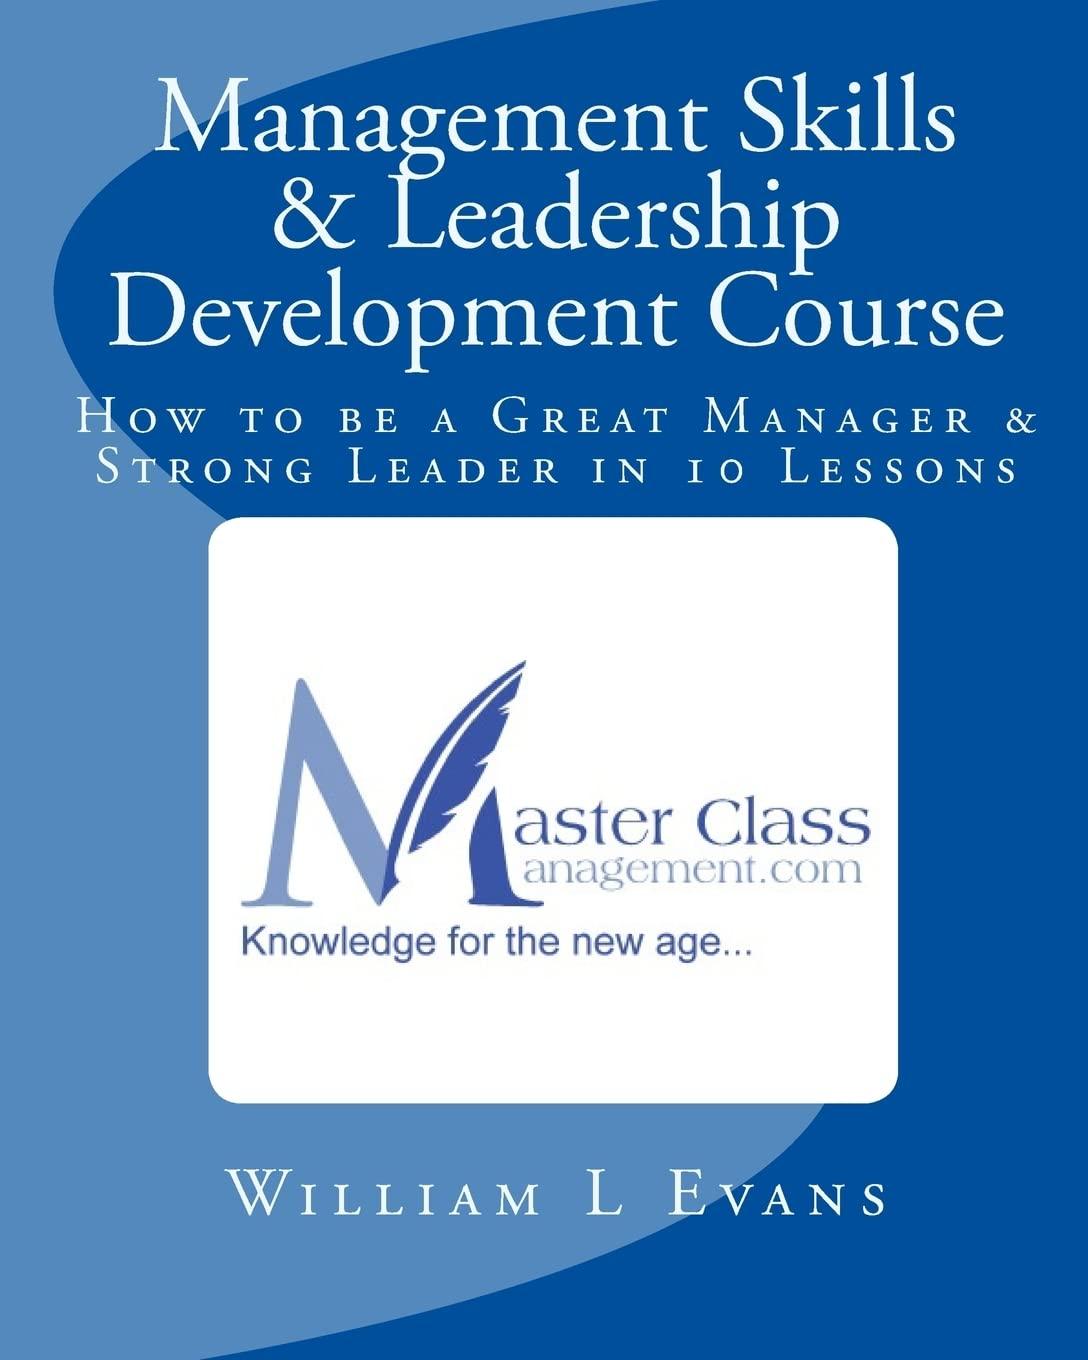 management skills and leadership development course how to be a great manager and strong leader in 10 lessons